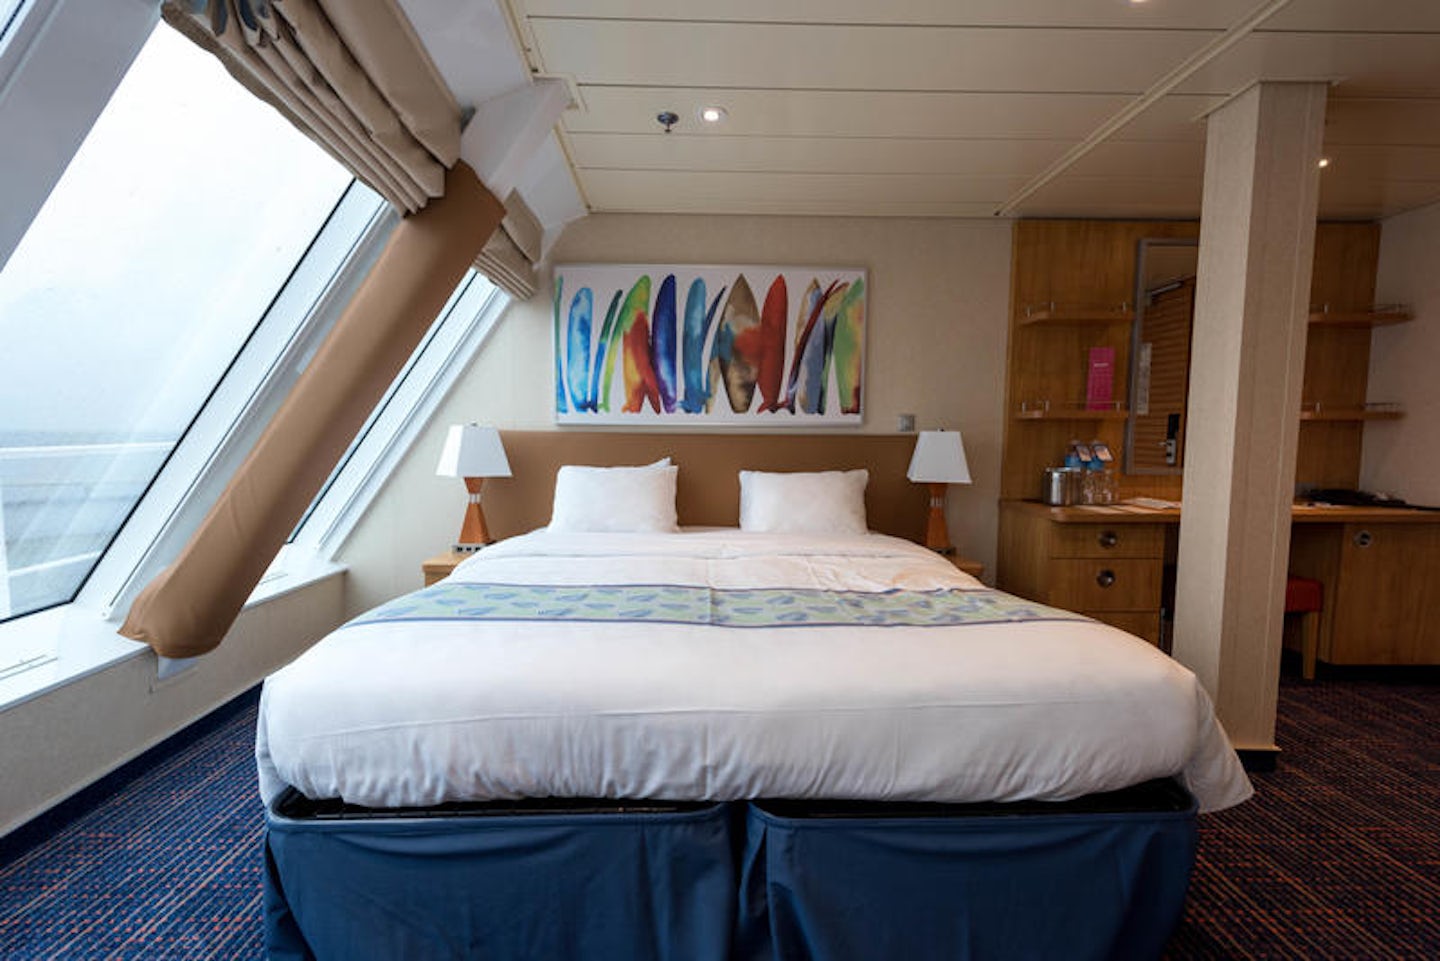 The Scenic Ocean-View Cabin on Carnival Elation